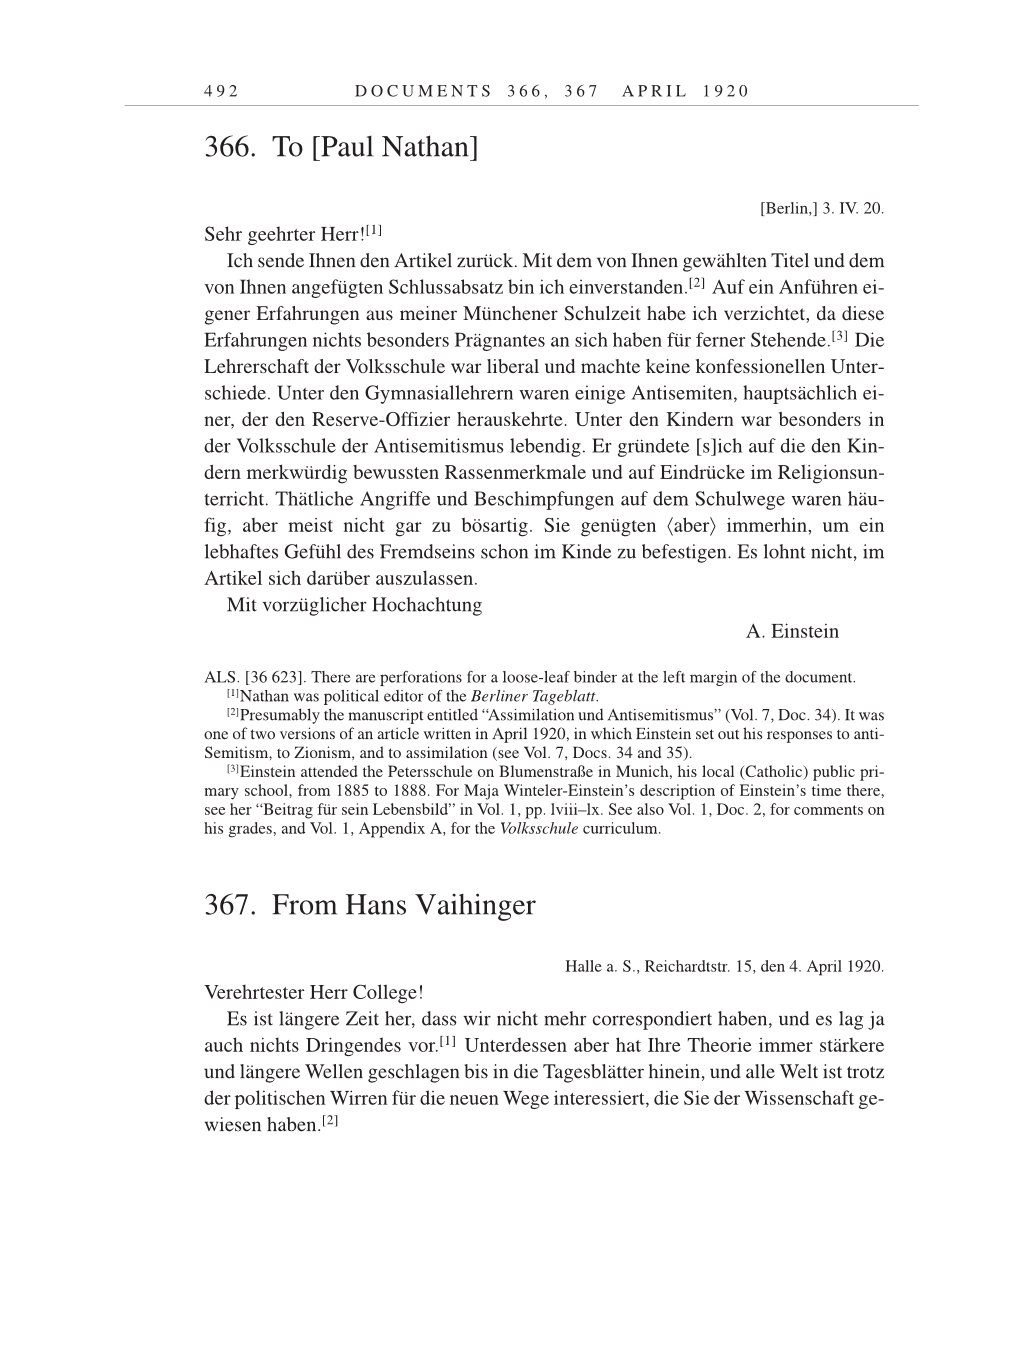 Volume 9: The Berlin Years: Correspondence January 1919-April 1920 page 492